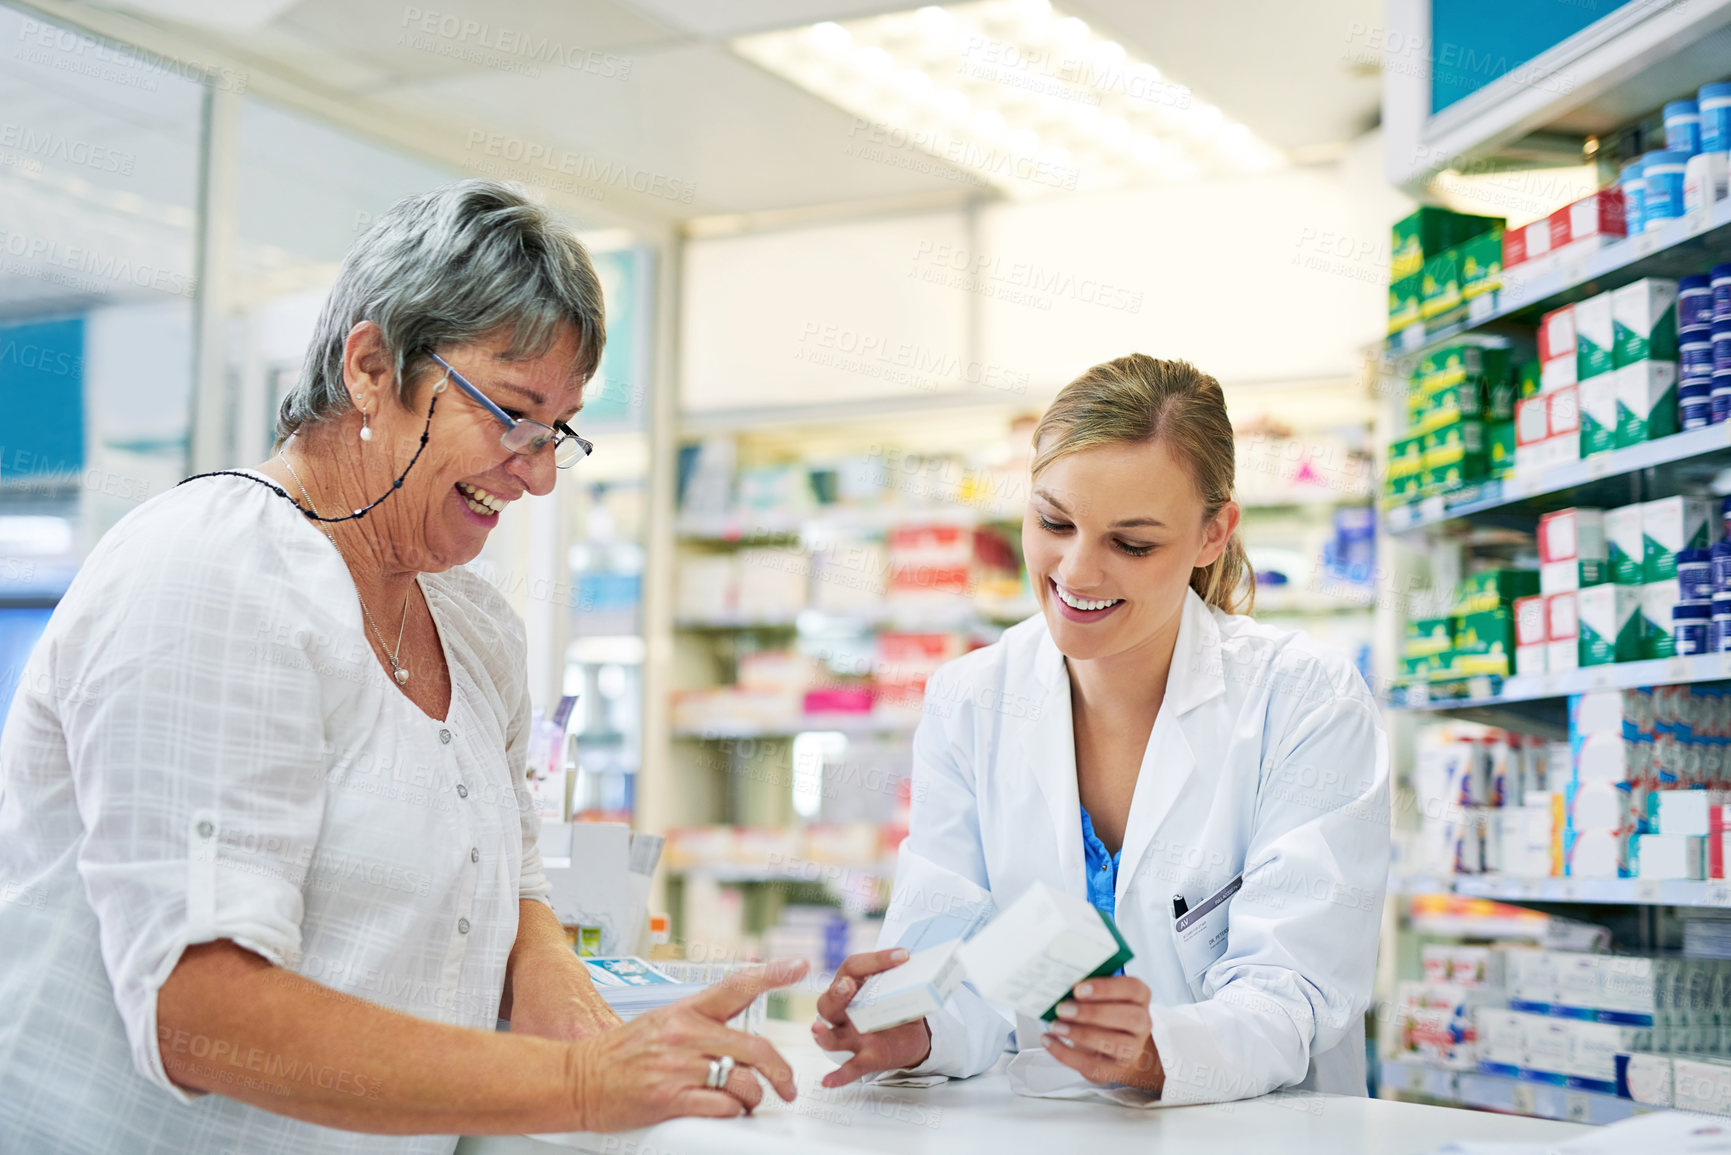 Buy stock photo Pharmacist explaining prescription medication to woman in the pharmacy for pharmaceutical healthcare treatment. Medical, counter and female chemist talking to patient on medicine in clinic dispensary